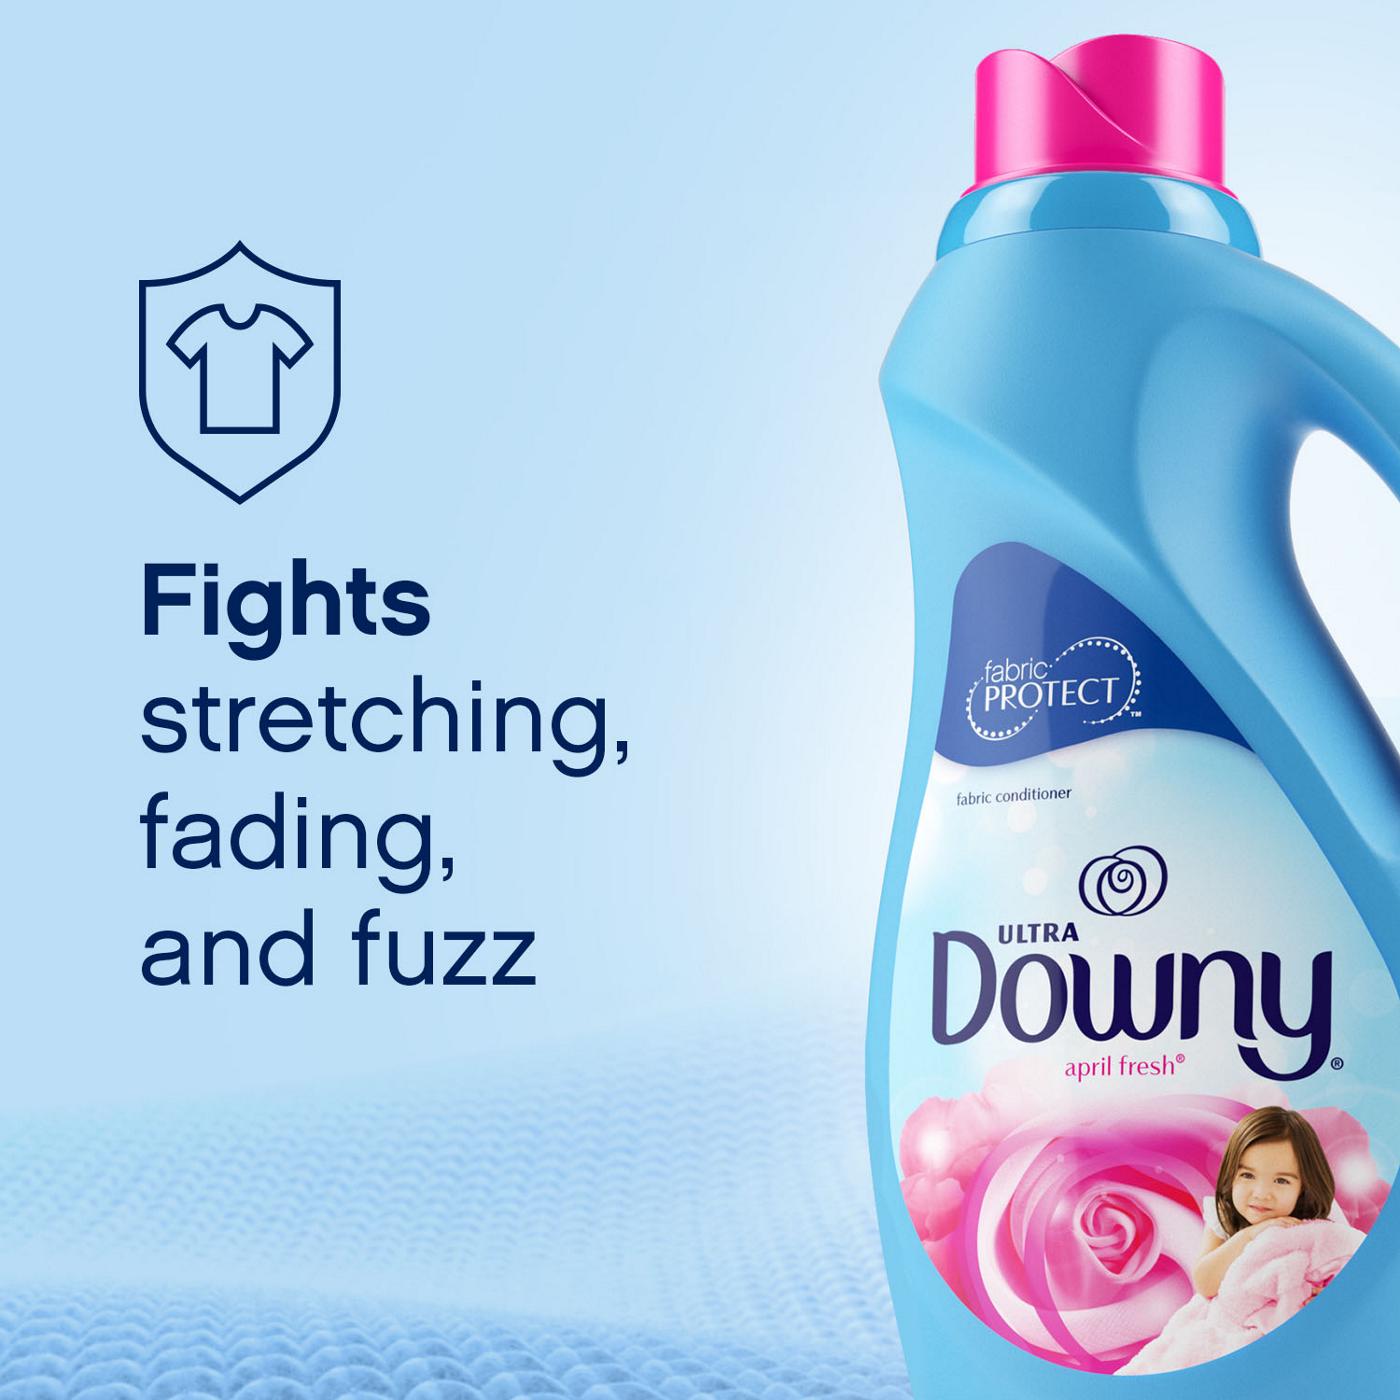 Downy Passion Fabric Softener 25 Loads - Shop Softeners at H-E-B